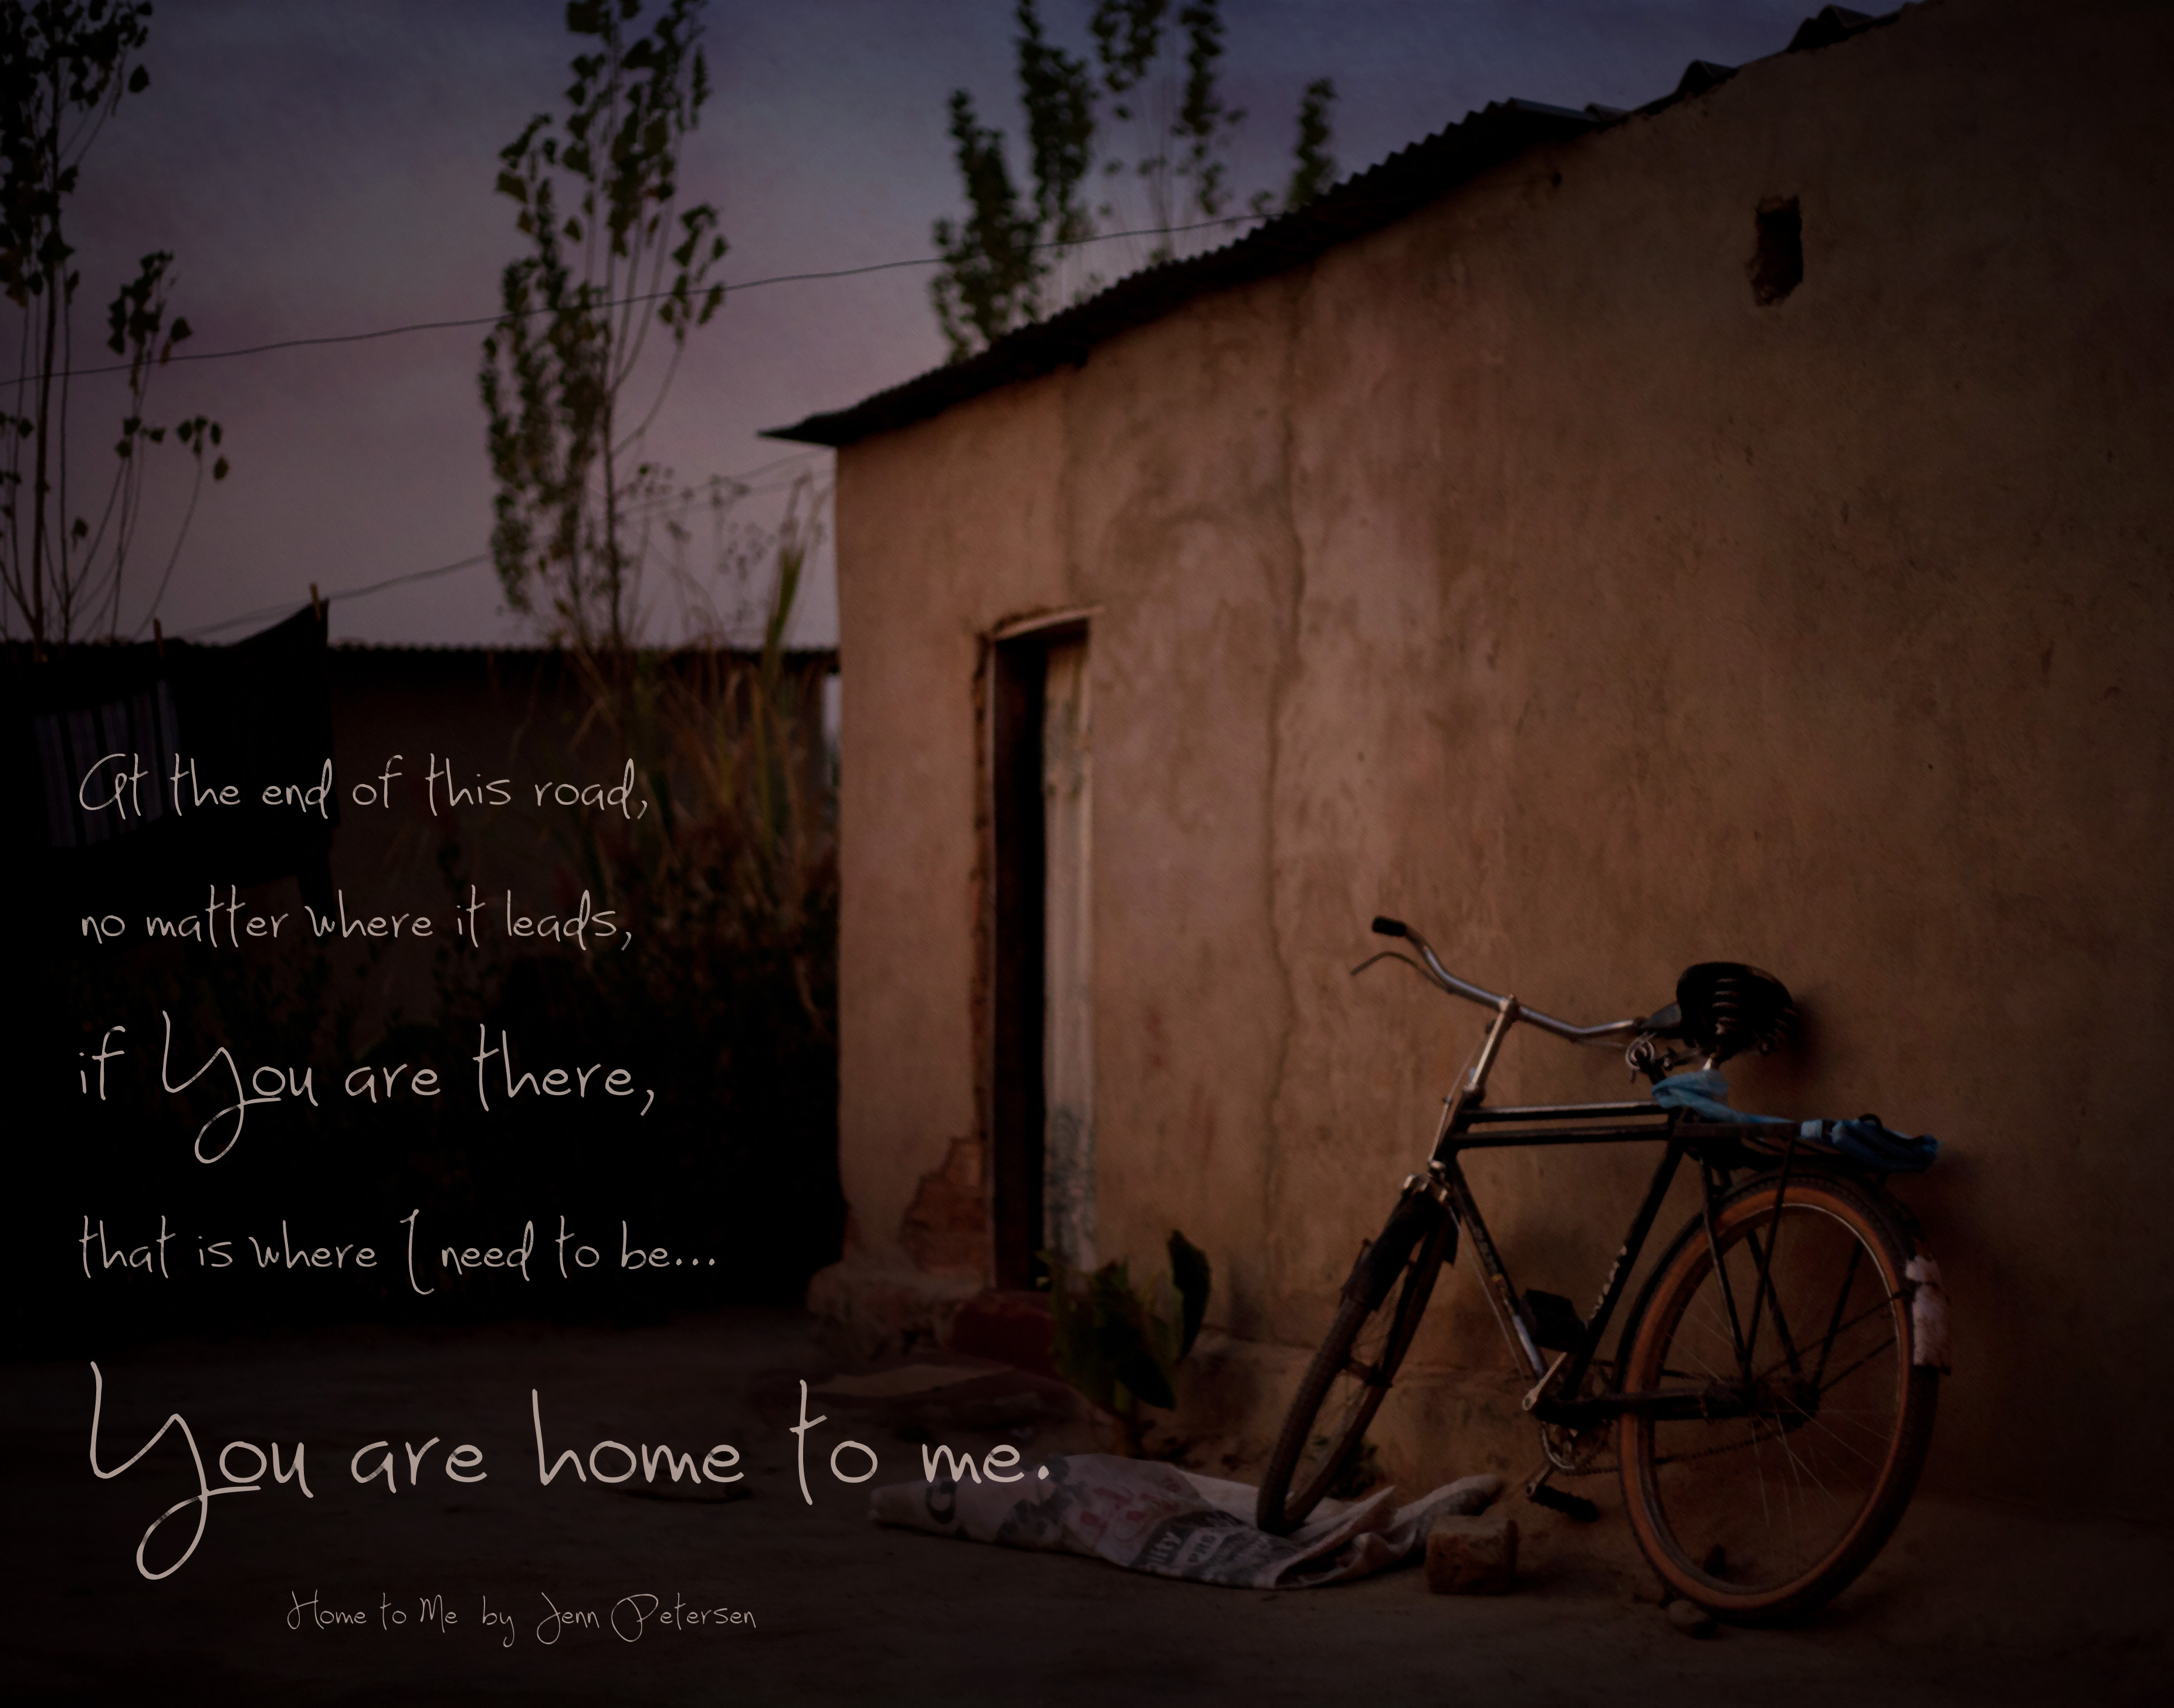 "If you are there, that is where I need to be..." #home | Running With Spears